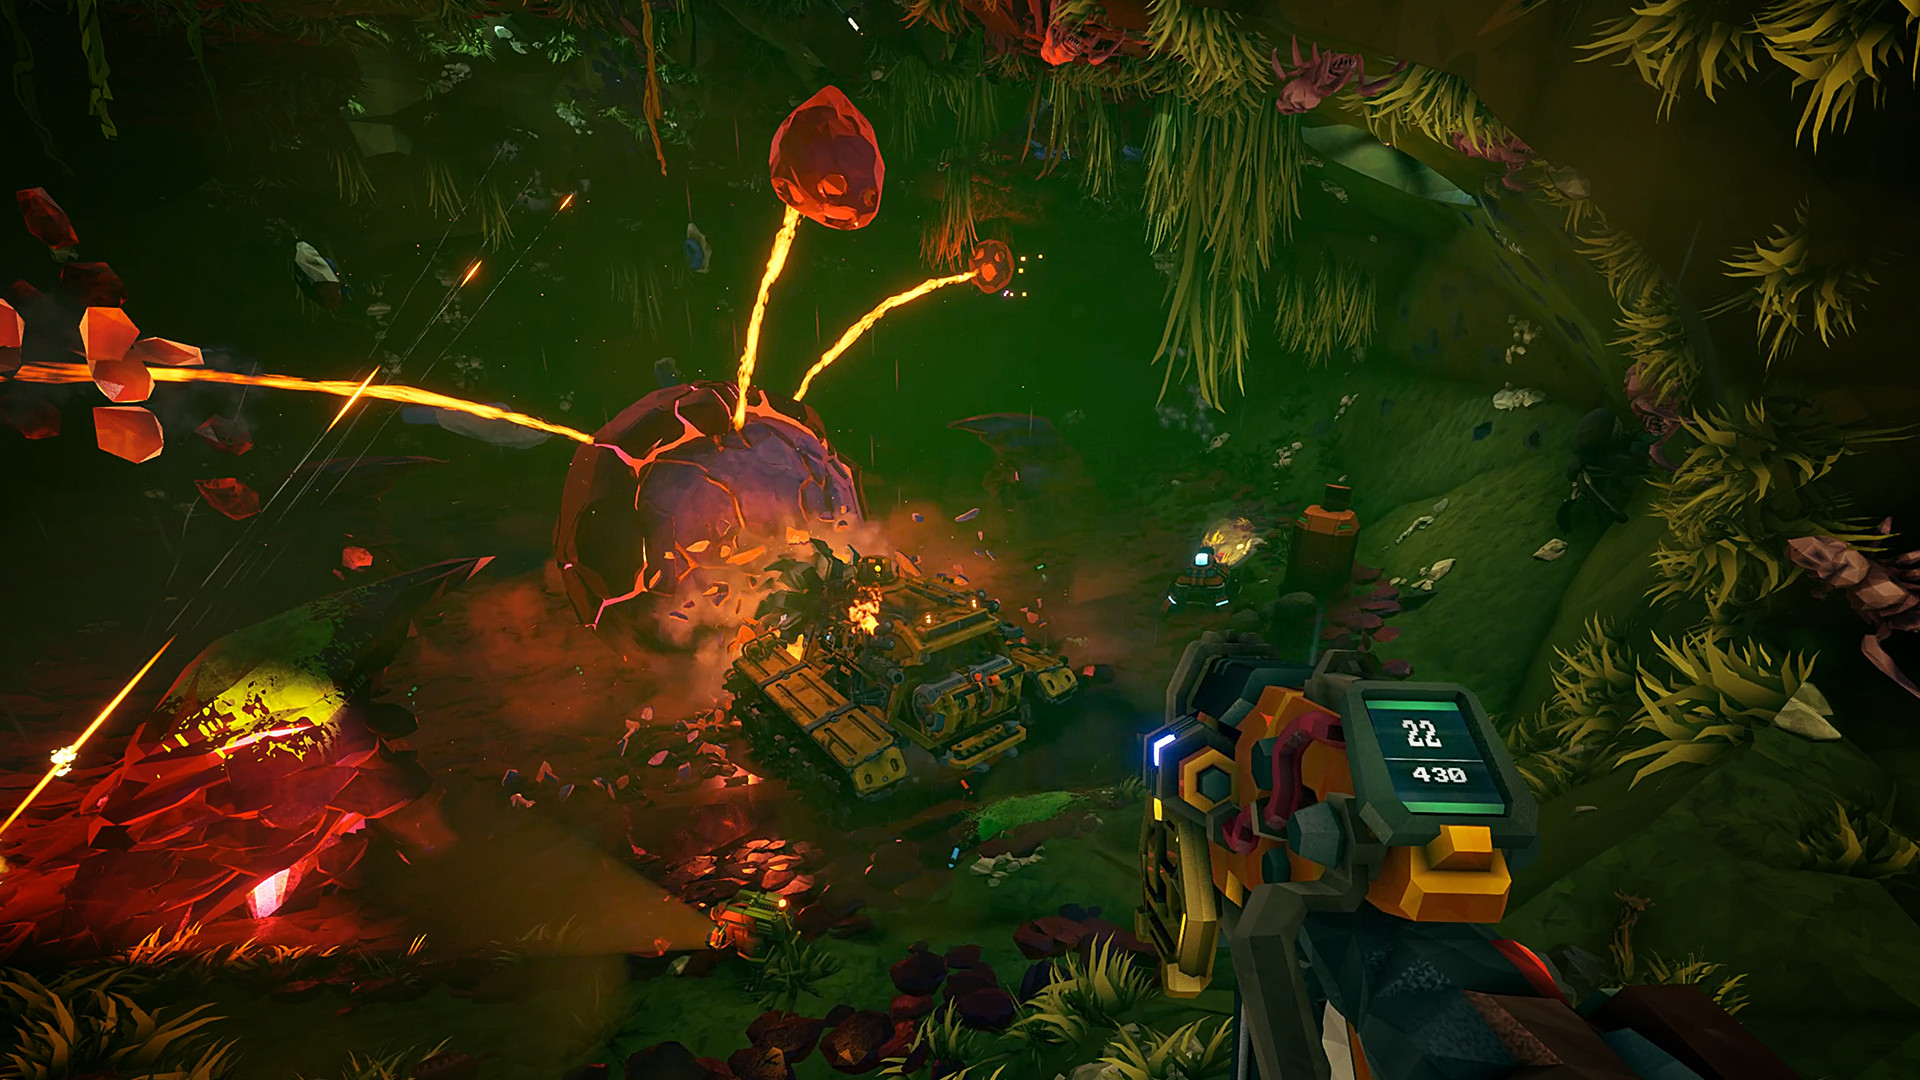 Viral co-op FPS Deep Rock Galactic is getting another spinoff - this time  it's a co-op roguelike